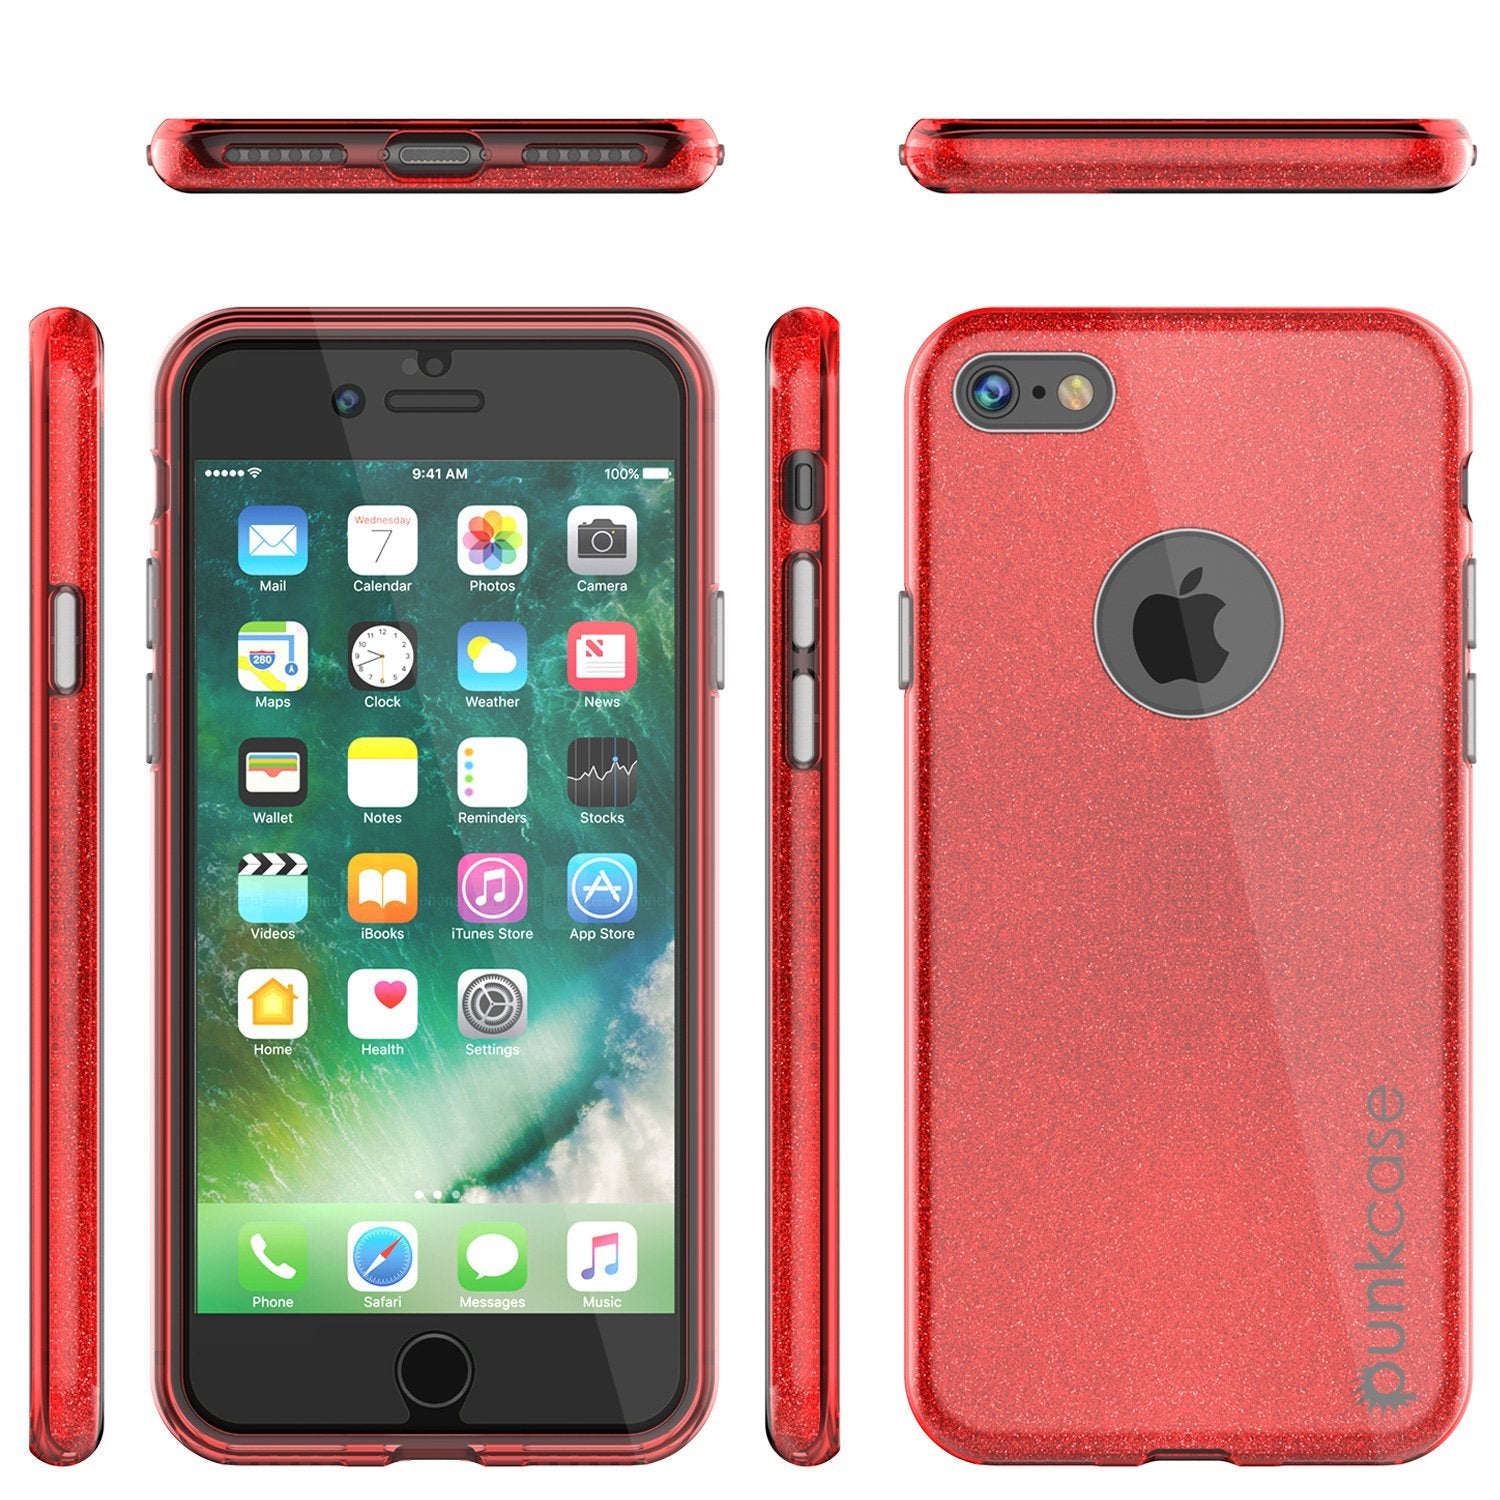 iPhone SE (4.7") Case, Punkcase Galactic 2.0 Series Ultra Slim Protective Armor TPU Cover [Red]